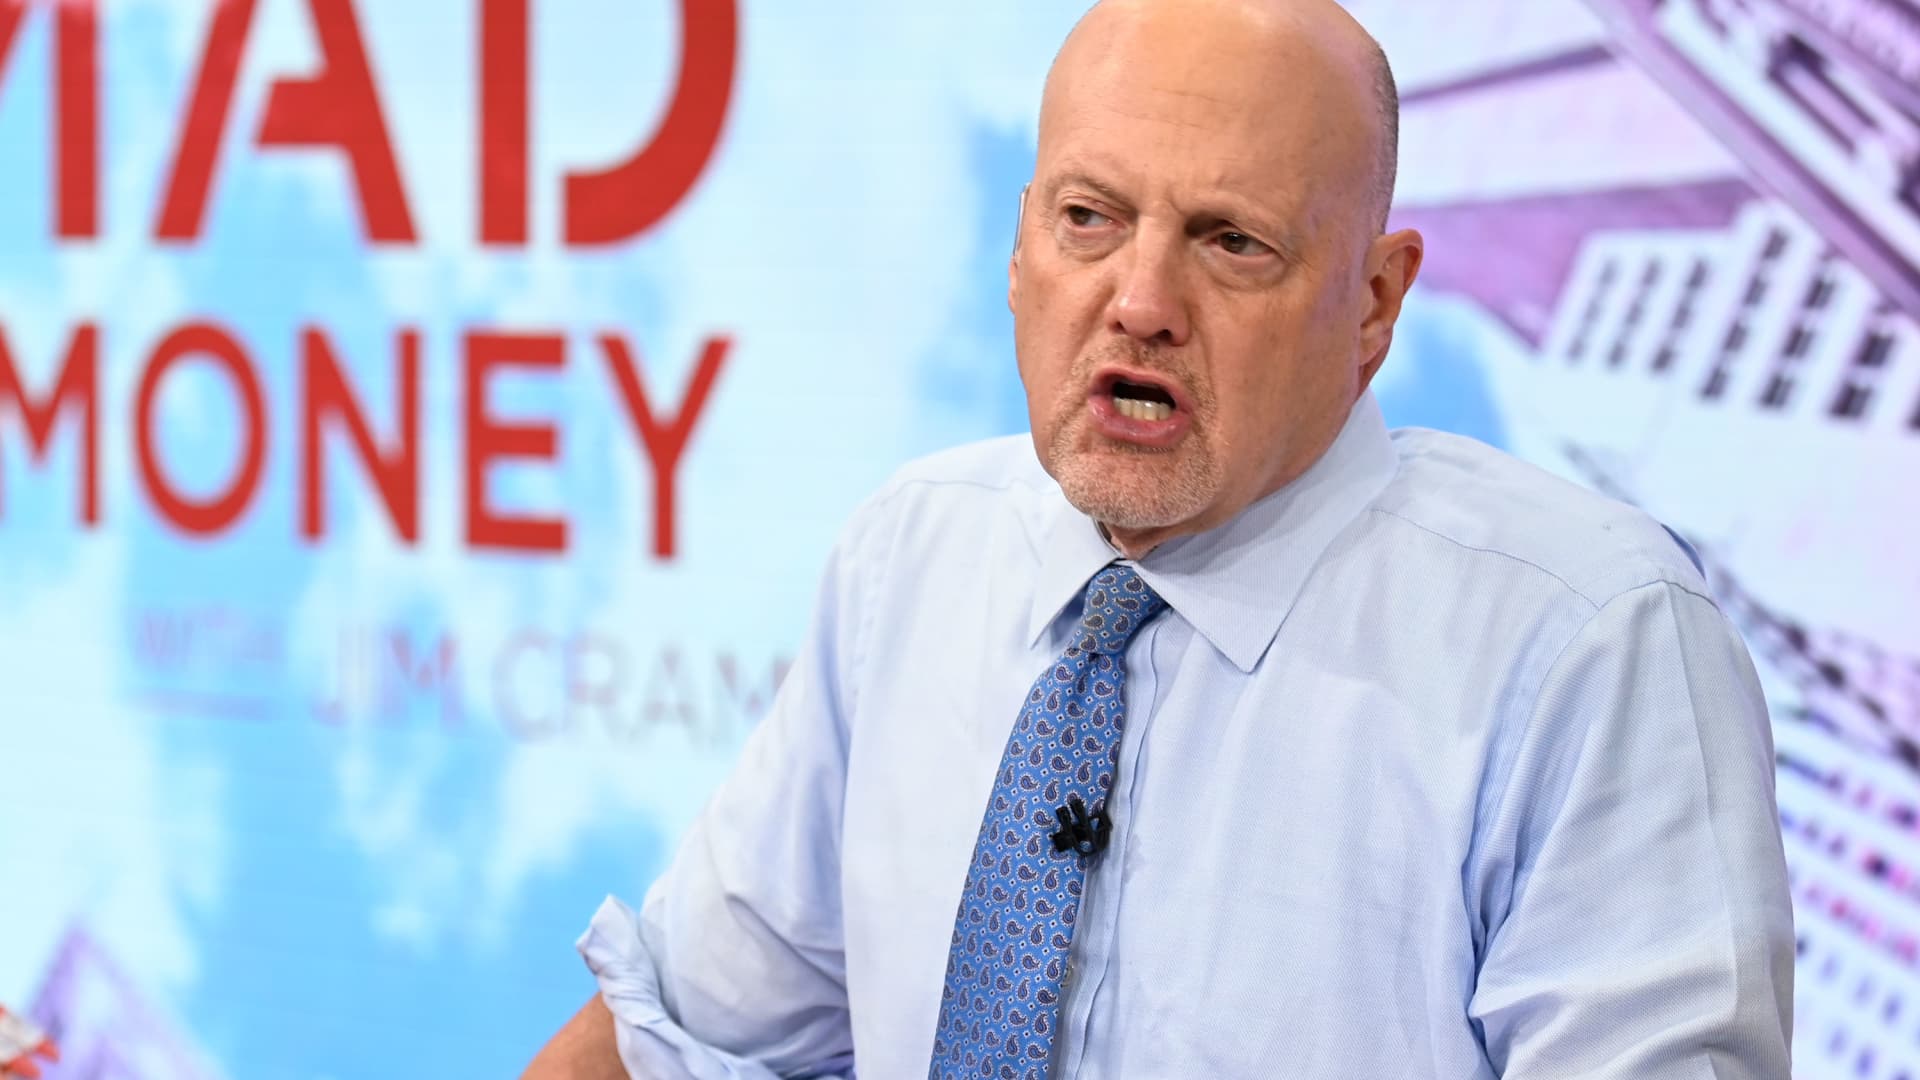 Jim Cramer’s guide to investing: Insider buying and short interest